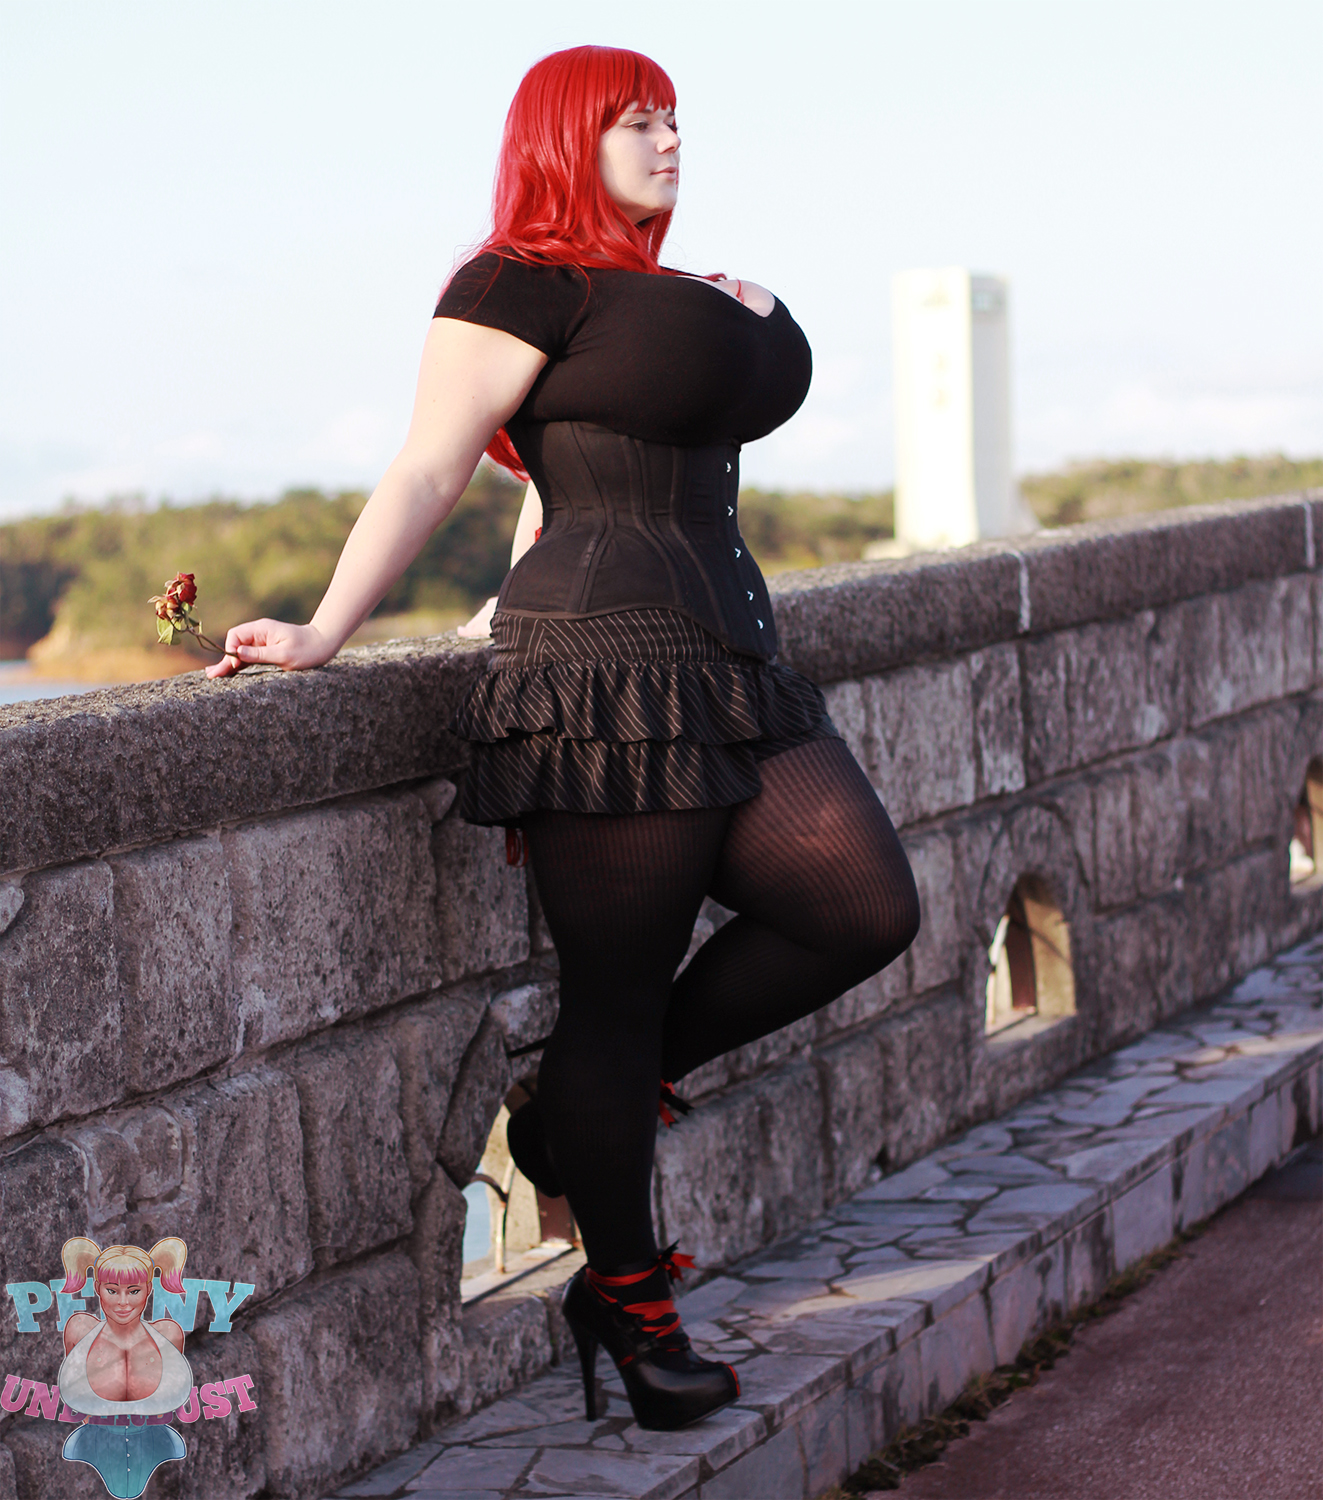 Amazing Bbw With Red Hair Knocks Boots With Latin Fellow.